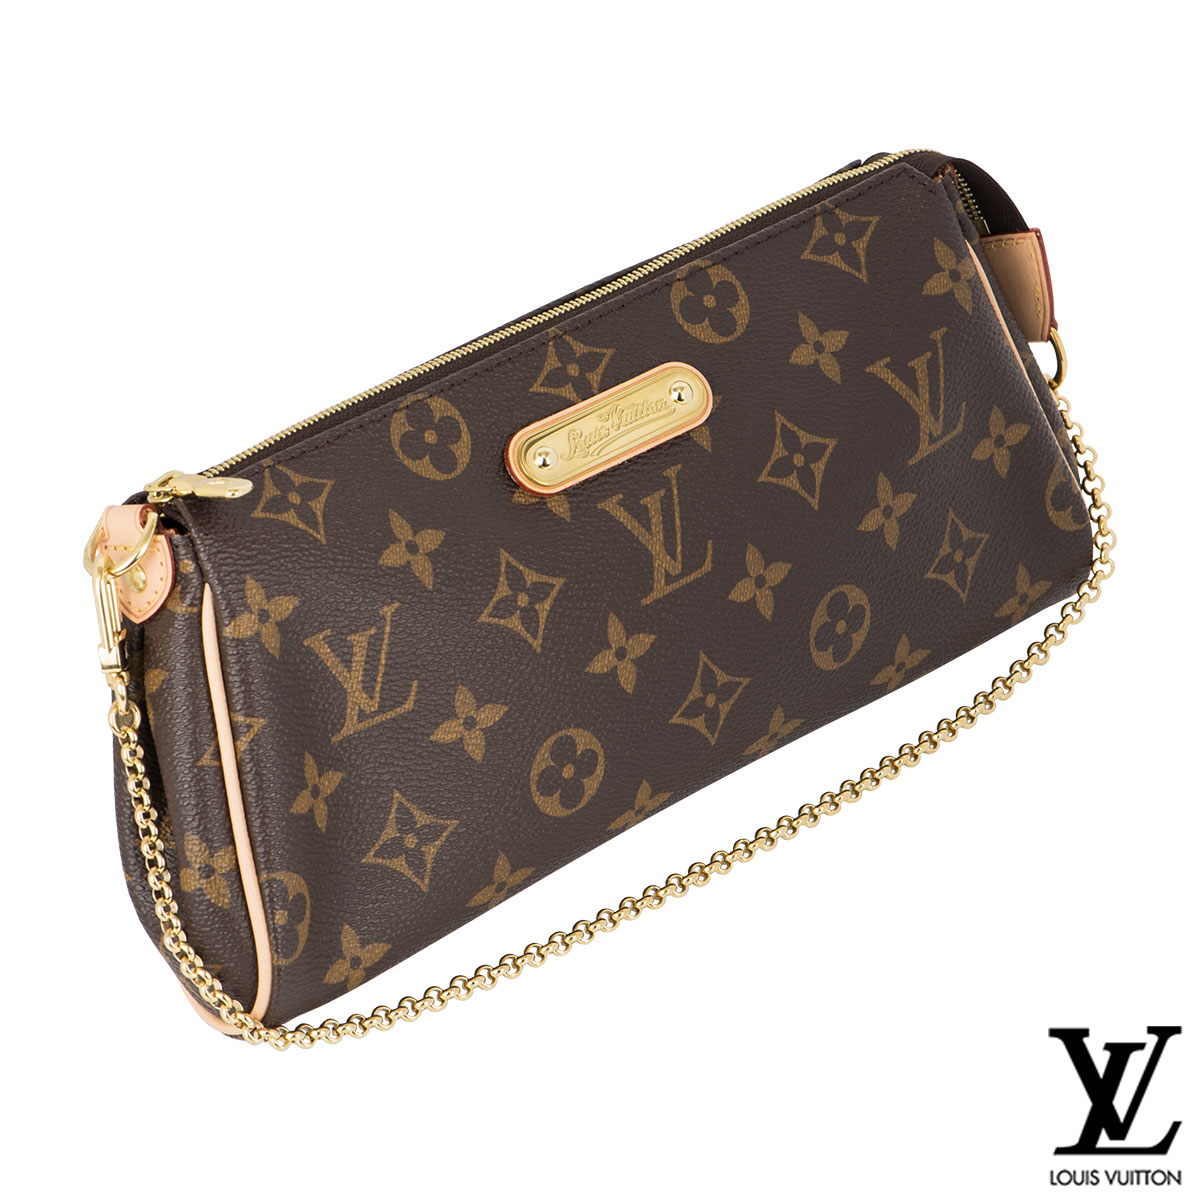 Louis Vuitton Eva Clutch Purchased in 2013 from the - Depop